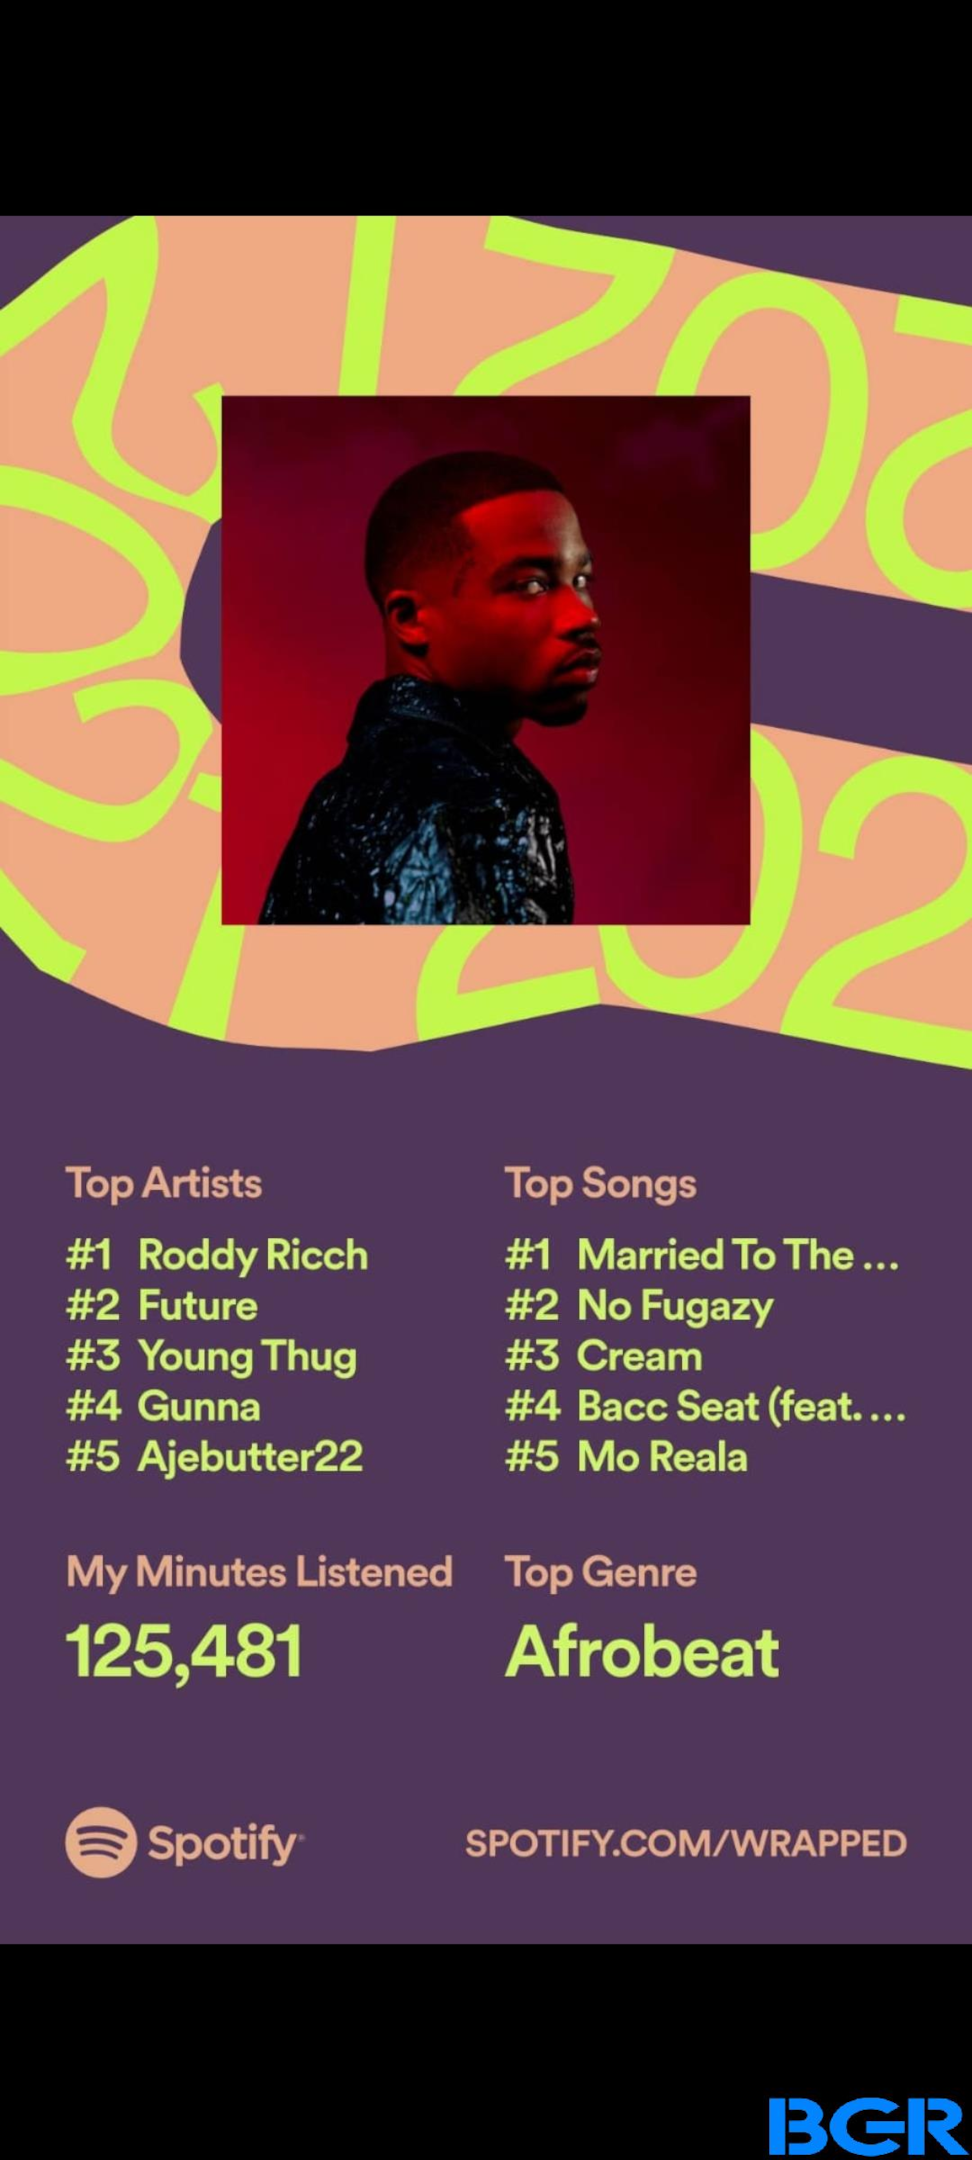 Spotify Wrapped showing top artists, top songs, top genre and total minutes listened  